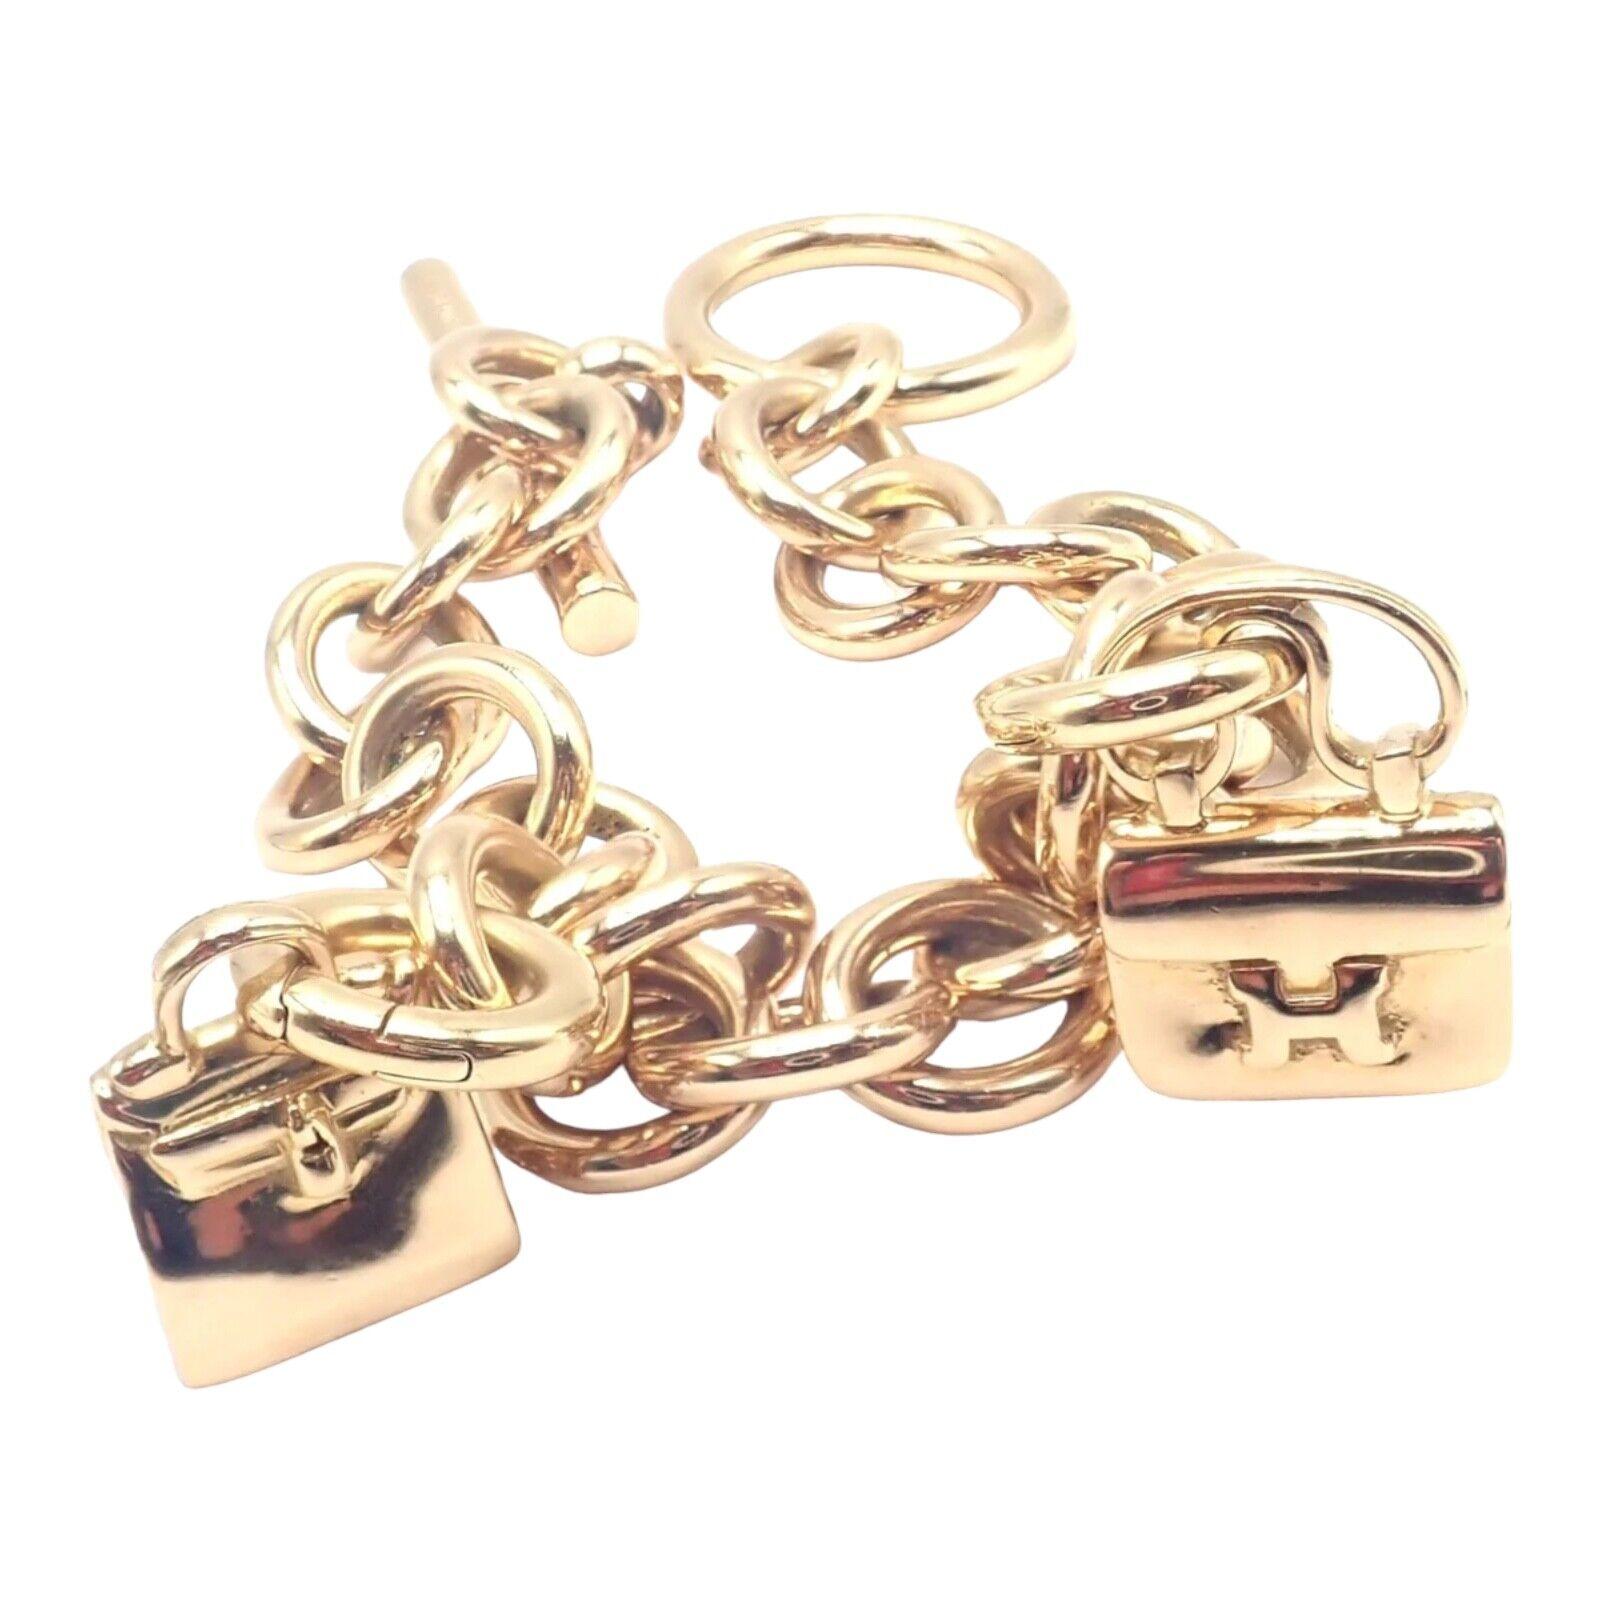 18k Yellow Gold 2 Hanging Bag Charms Link Bracelet by Hermes. 
Includes a total of 2 Hermes bag charms: 
With Kelly bag 22x12mm
Constance bag 25x14mm
Both charms are detachable
The Authentic! Hermes 18k Yellow Gold Heavy Link Toggle With Two Charms